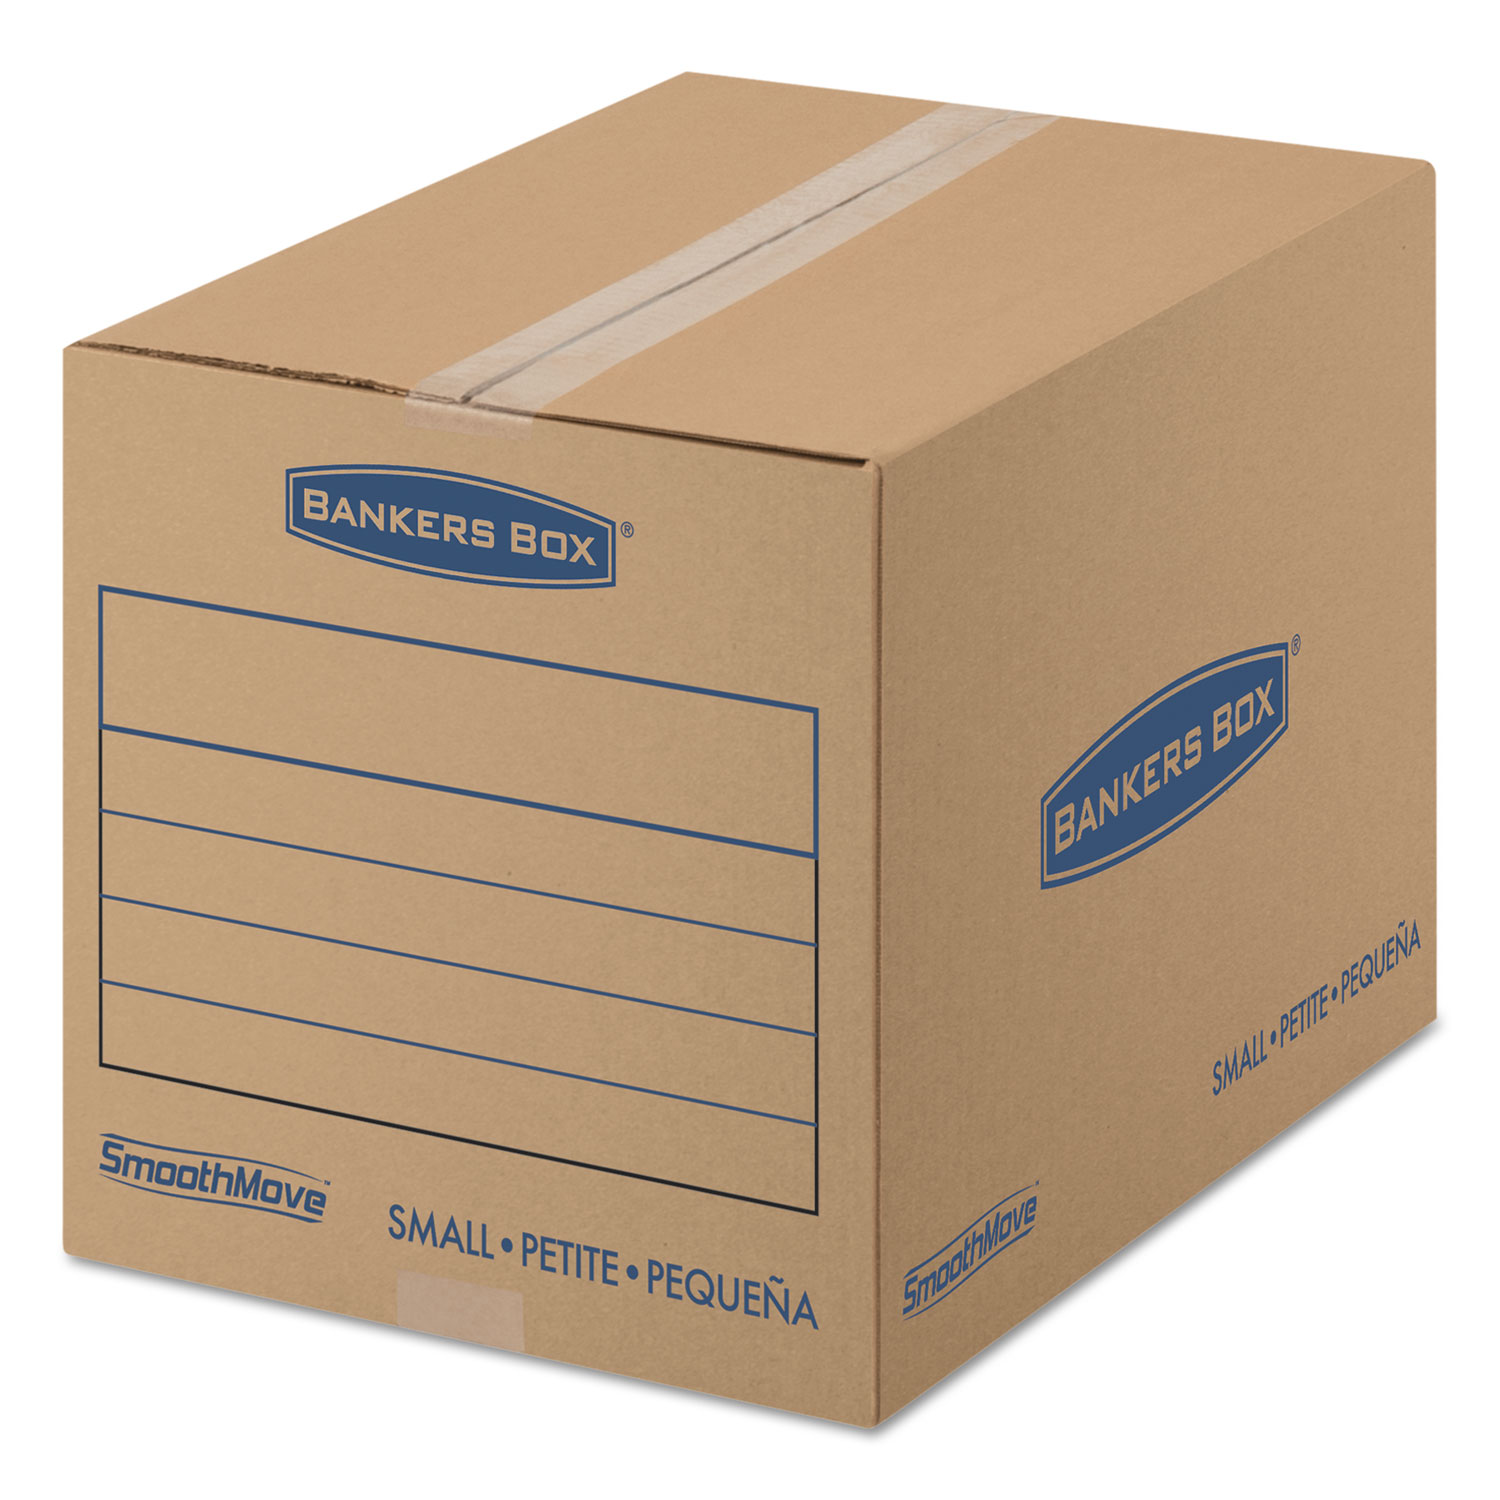  Bankers Box 7713801 SmoothMove Basic Moving Boxes, Small, Regular Slotted Container (RSC), 16 x 12 x 12, Brown Kraft/Blue, 25/Bundle (FEL7713801) 